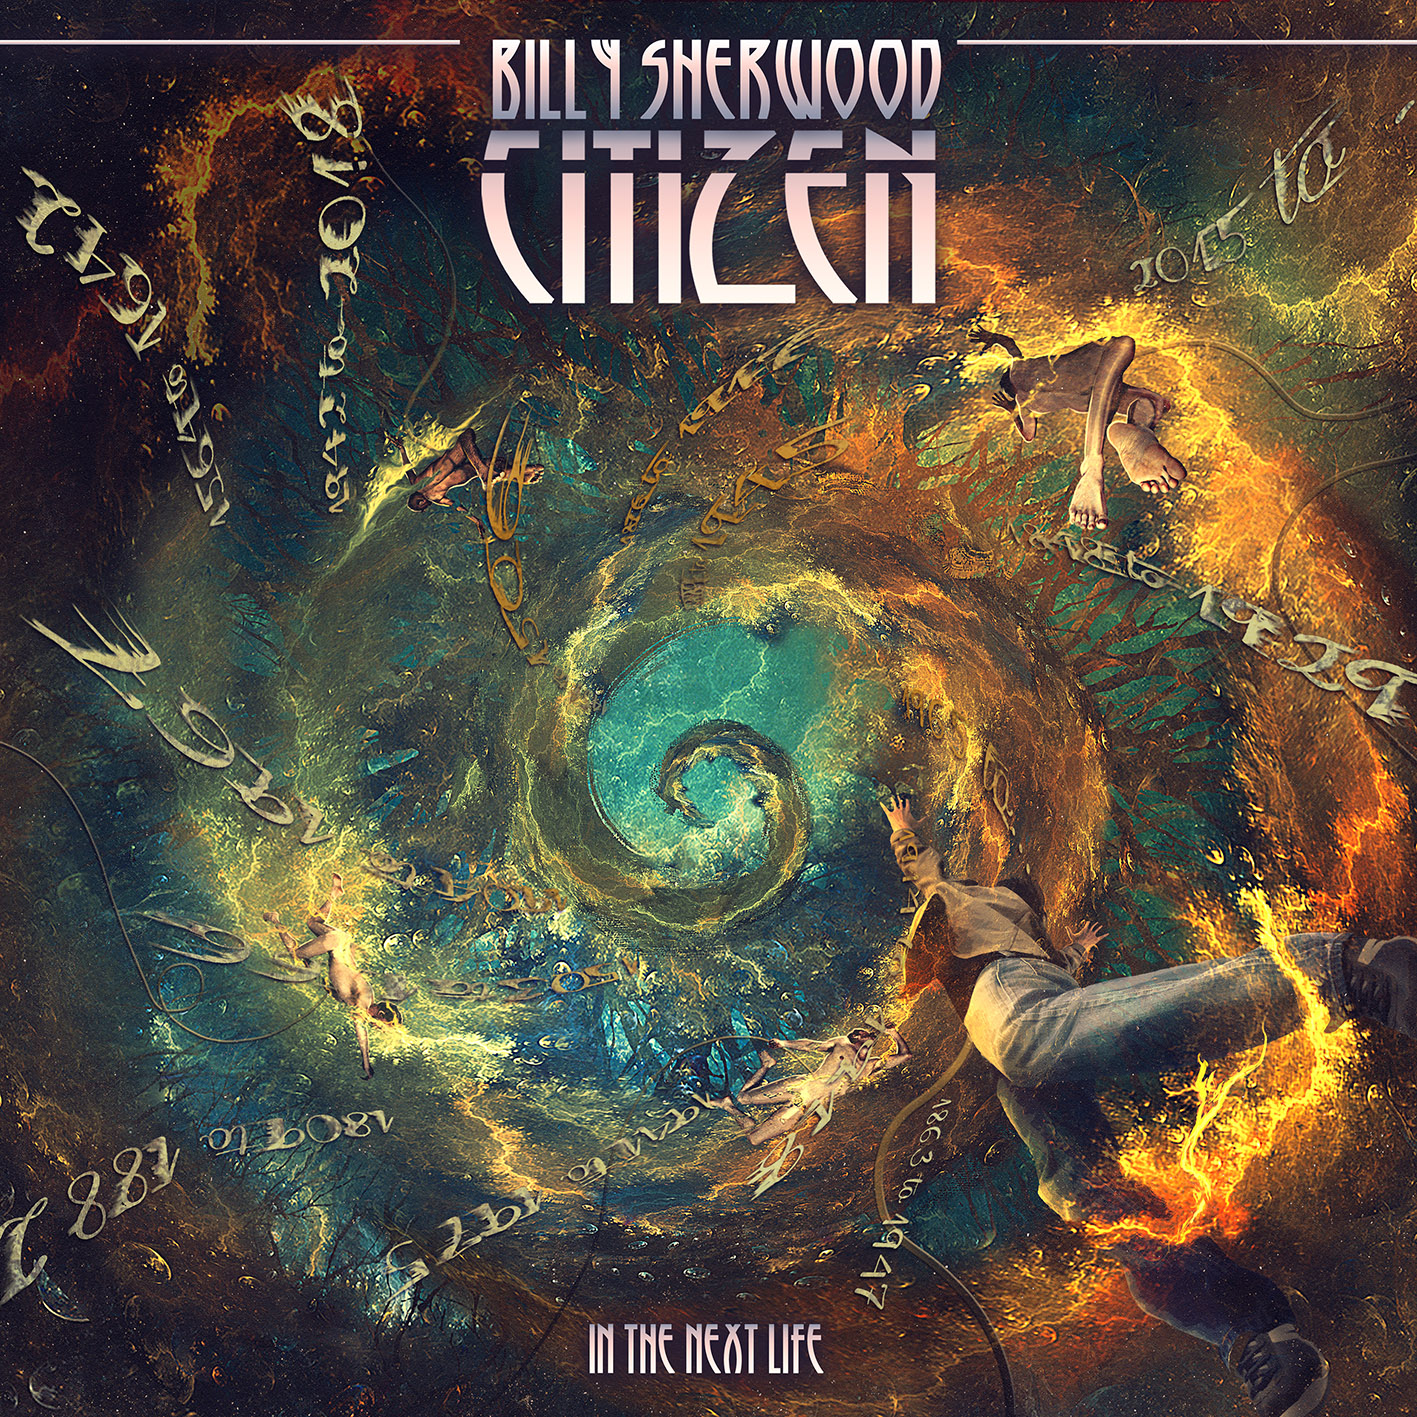 Billy Sherwood - “Citizen: In The Next Life”